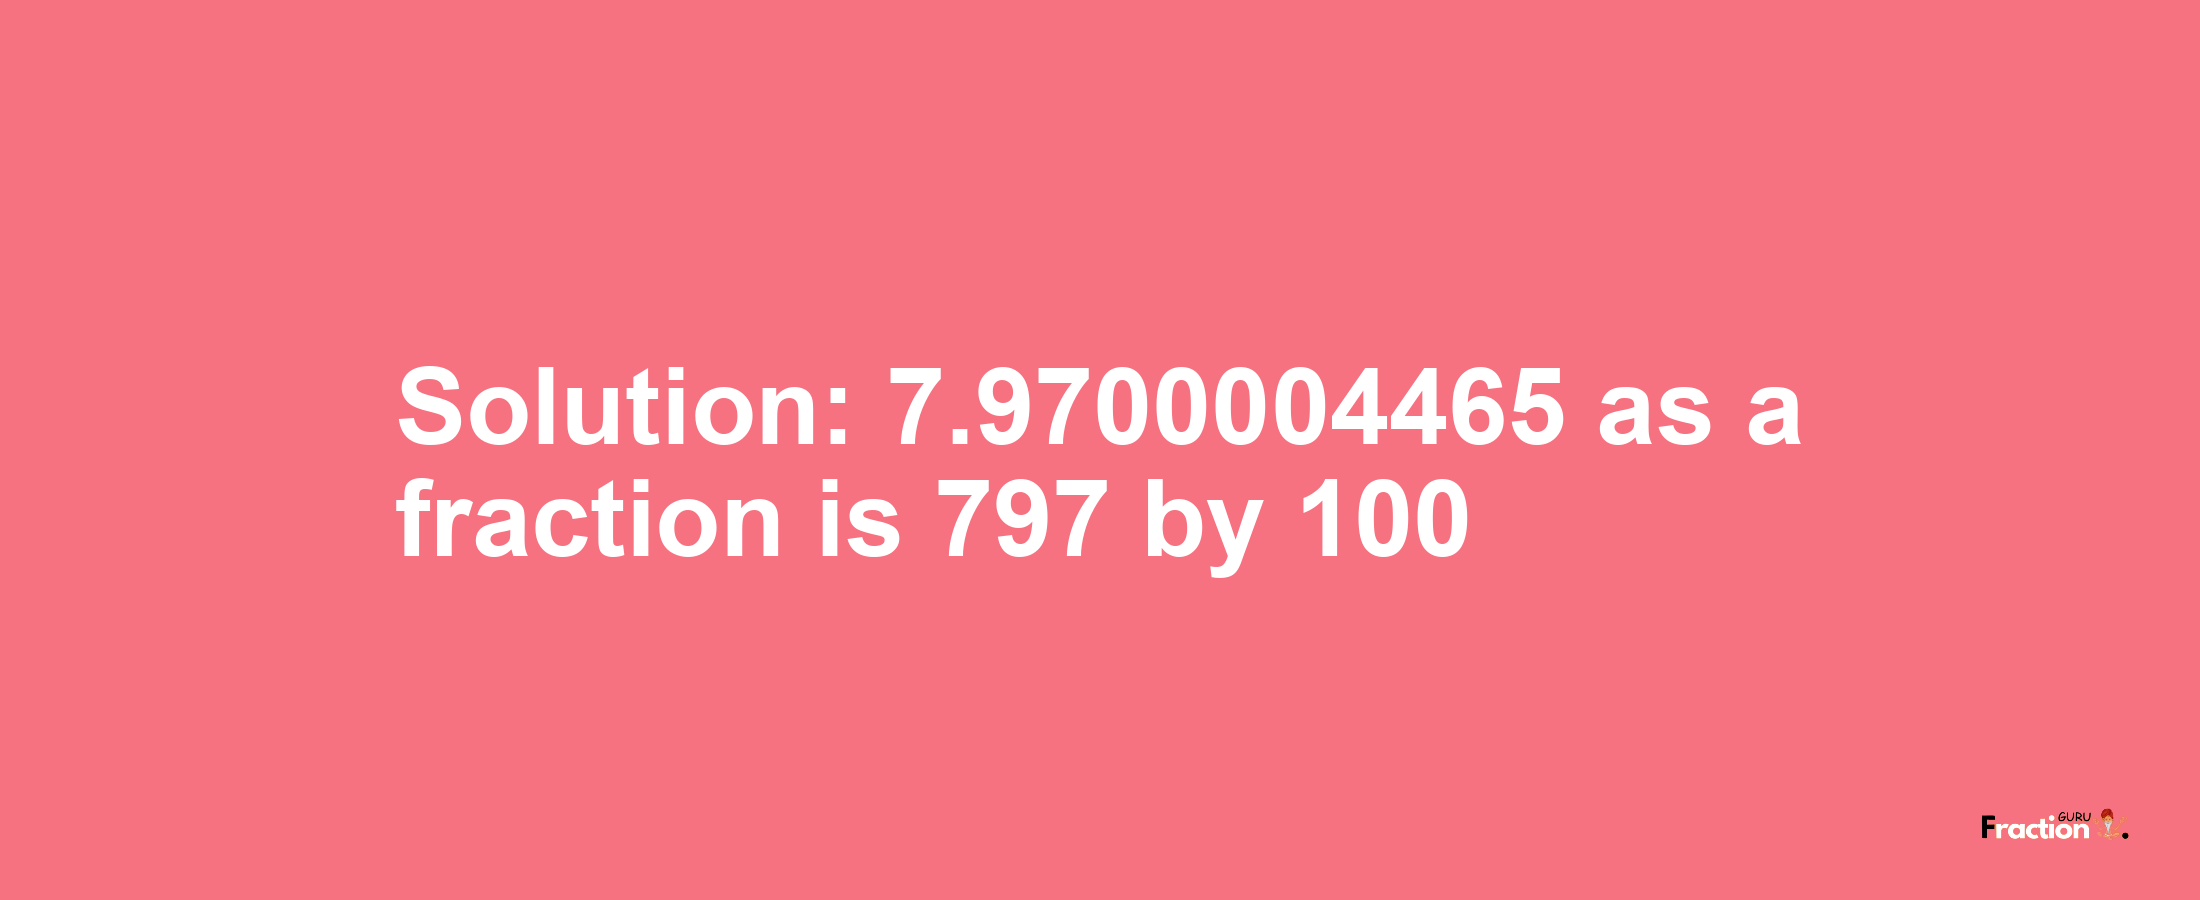 Solution:7.9700004465 as a fraction is 797/100